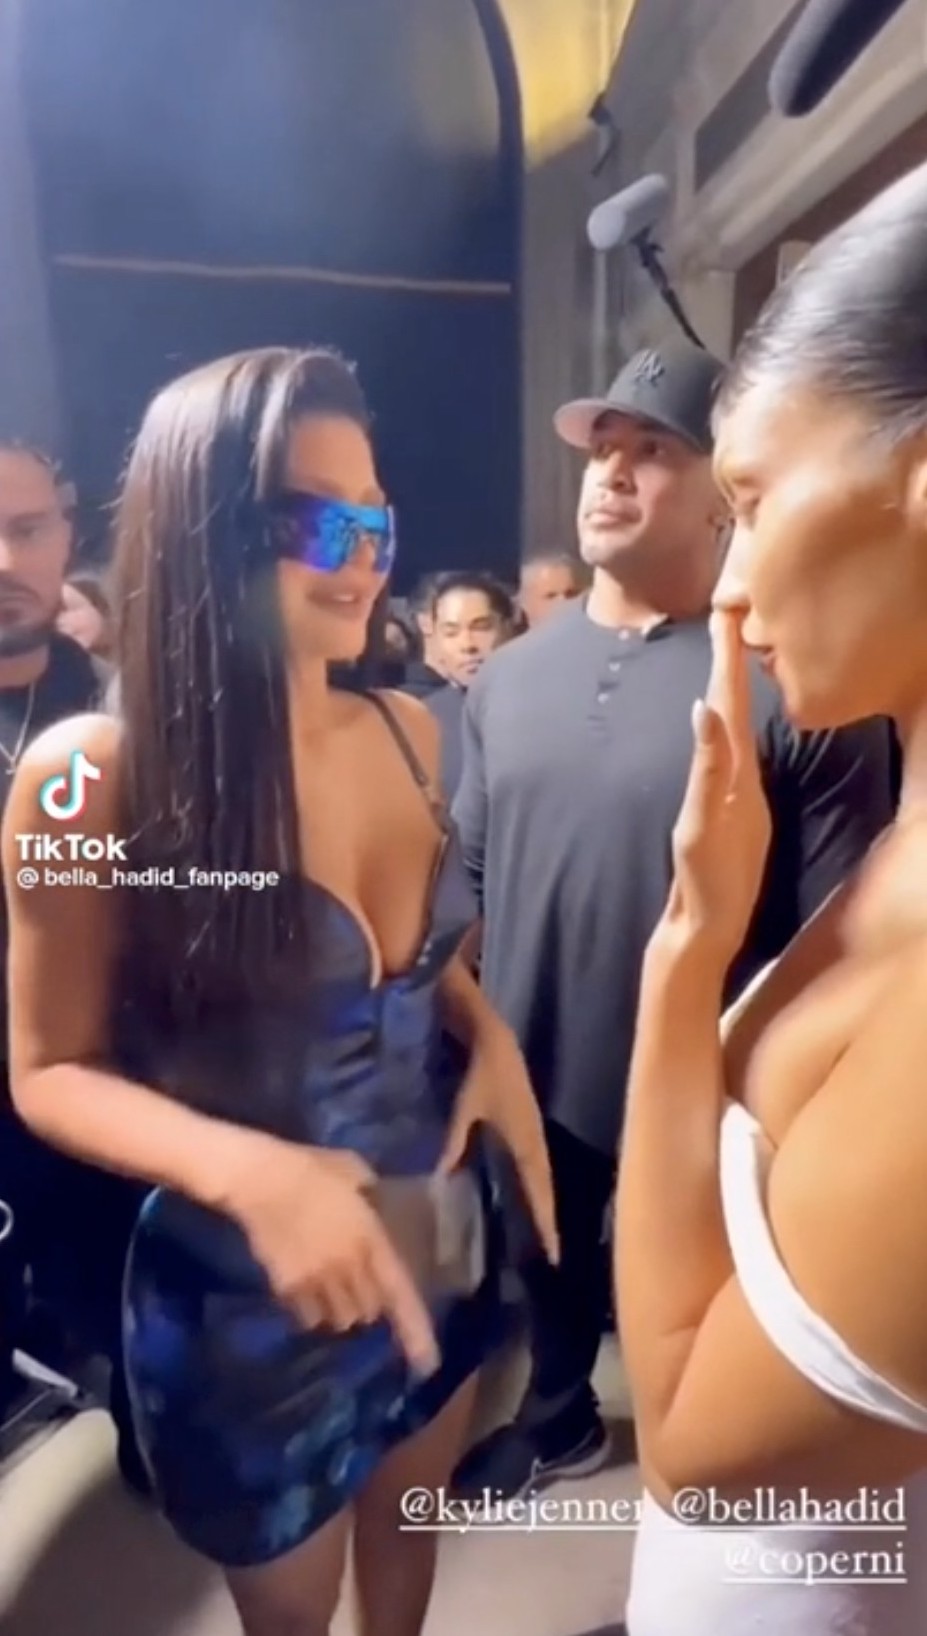 Kylie Jenner mocked by fans for ’embarrassing’ moment caught on video during star’s Paris Fashion Week appearance